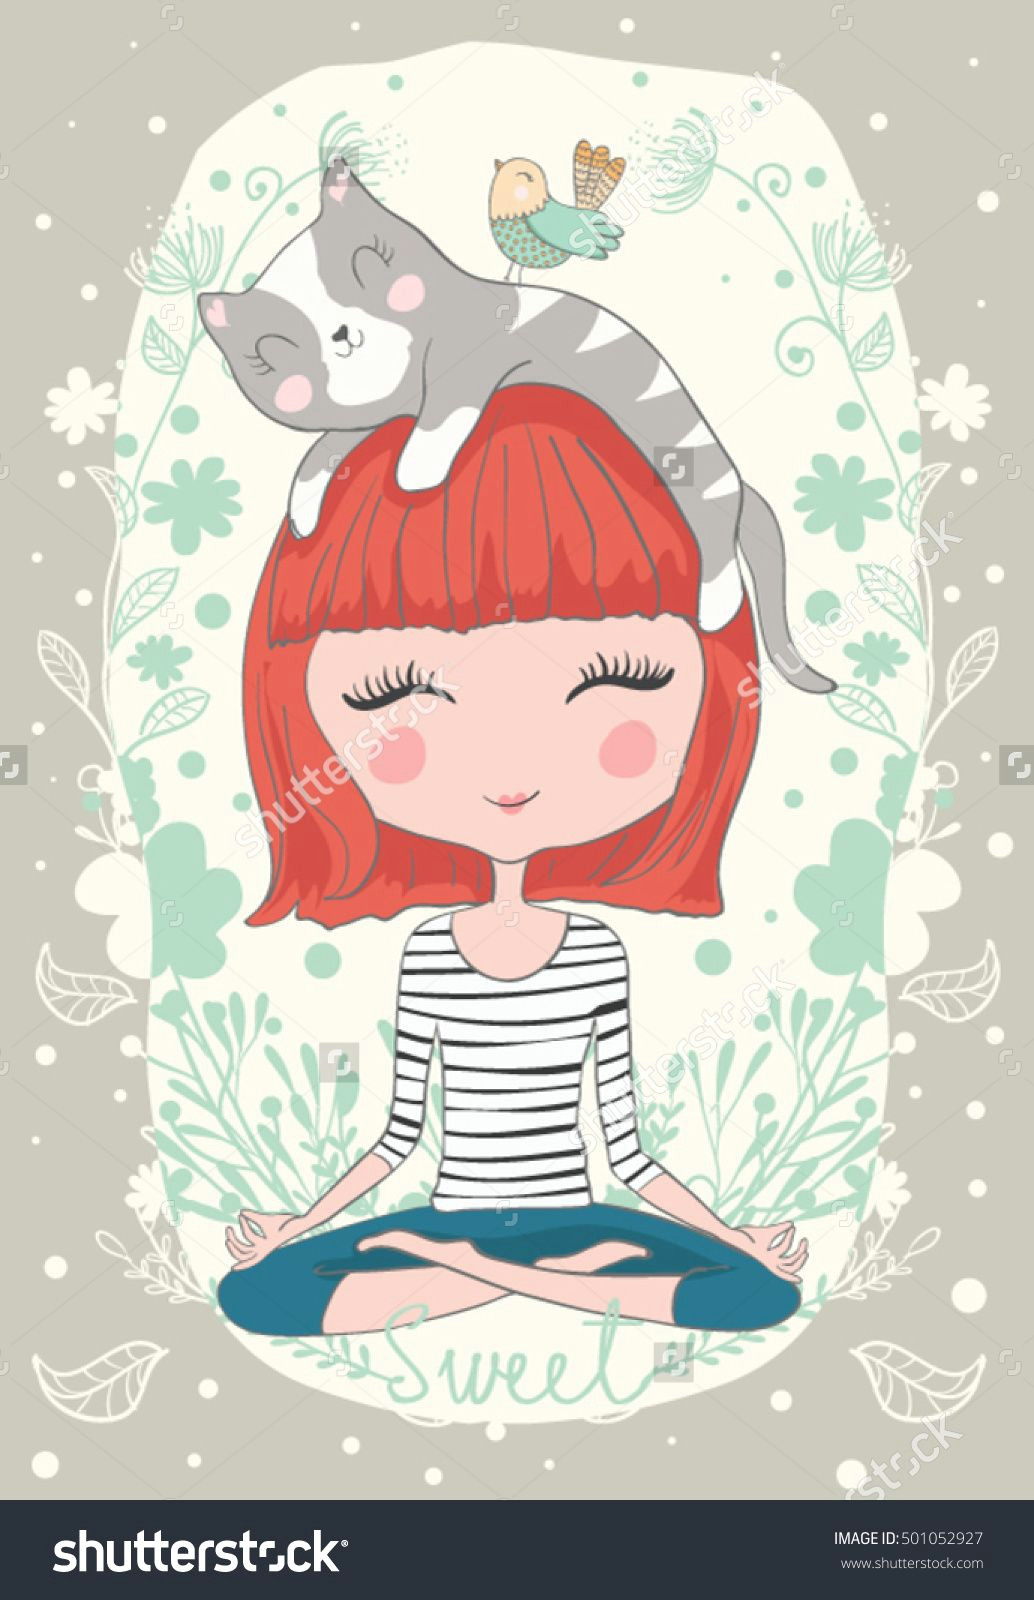 Drawing Of A Girl Holding A Cat Cute Girl with Cat Cute Cat Illustration for Apparel Book